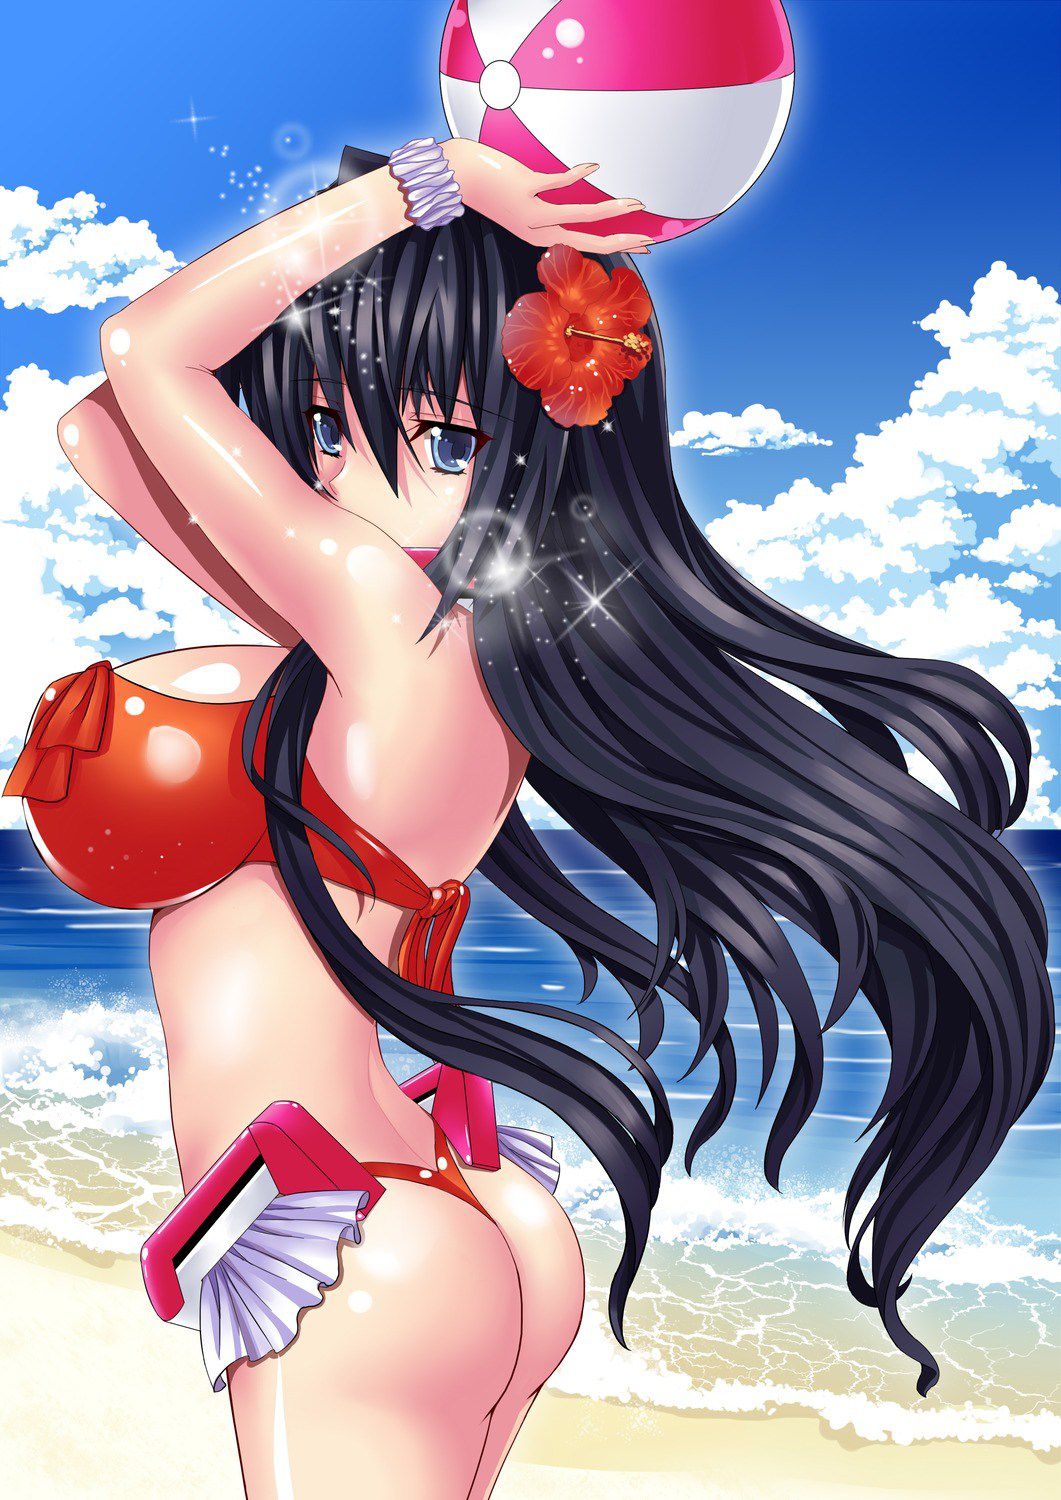 Will continue summer swimsuit pictures 5